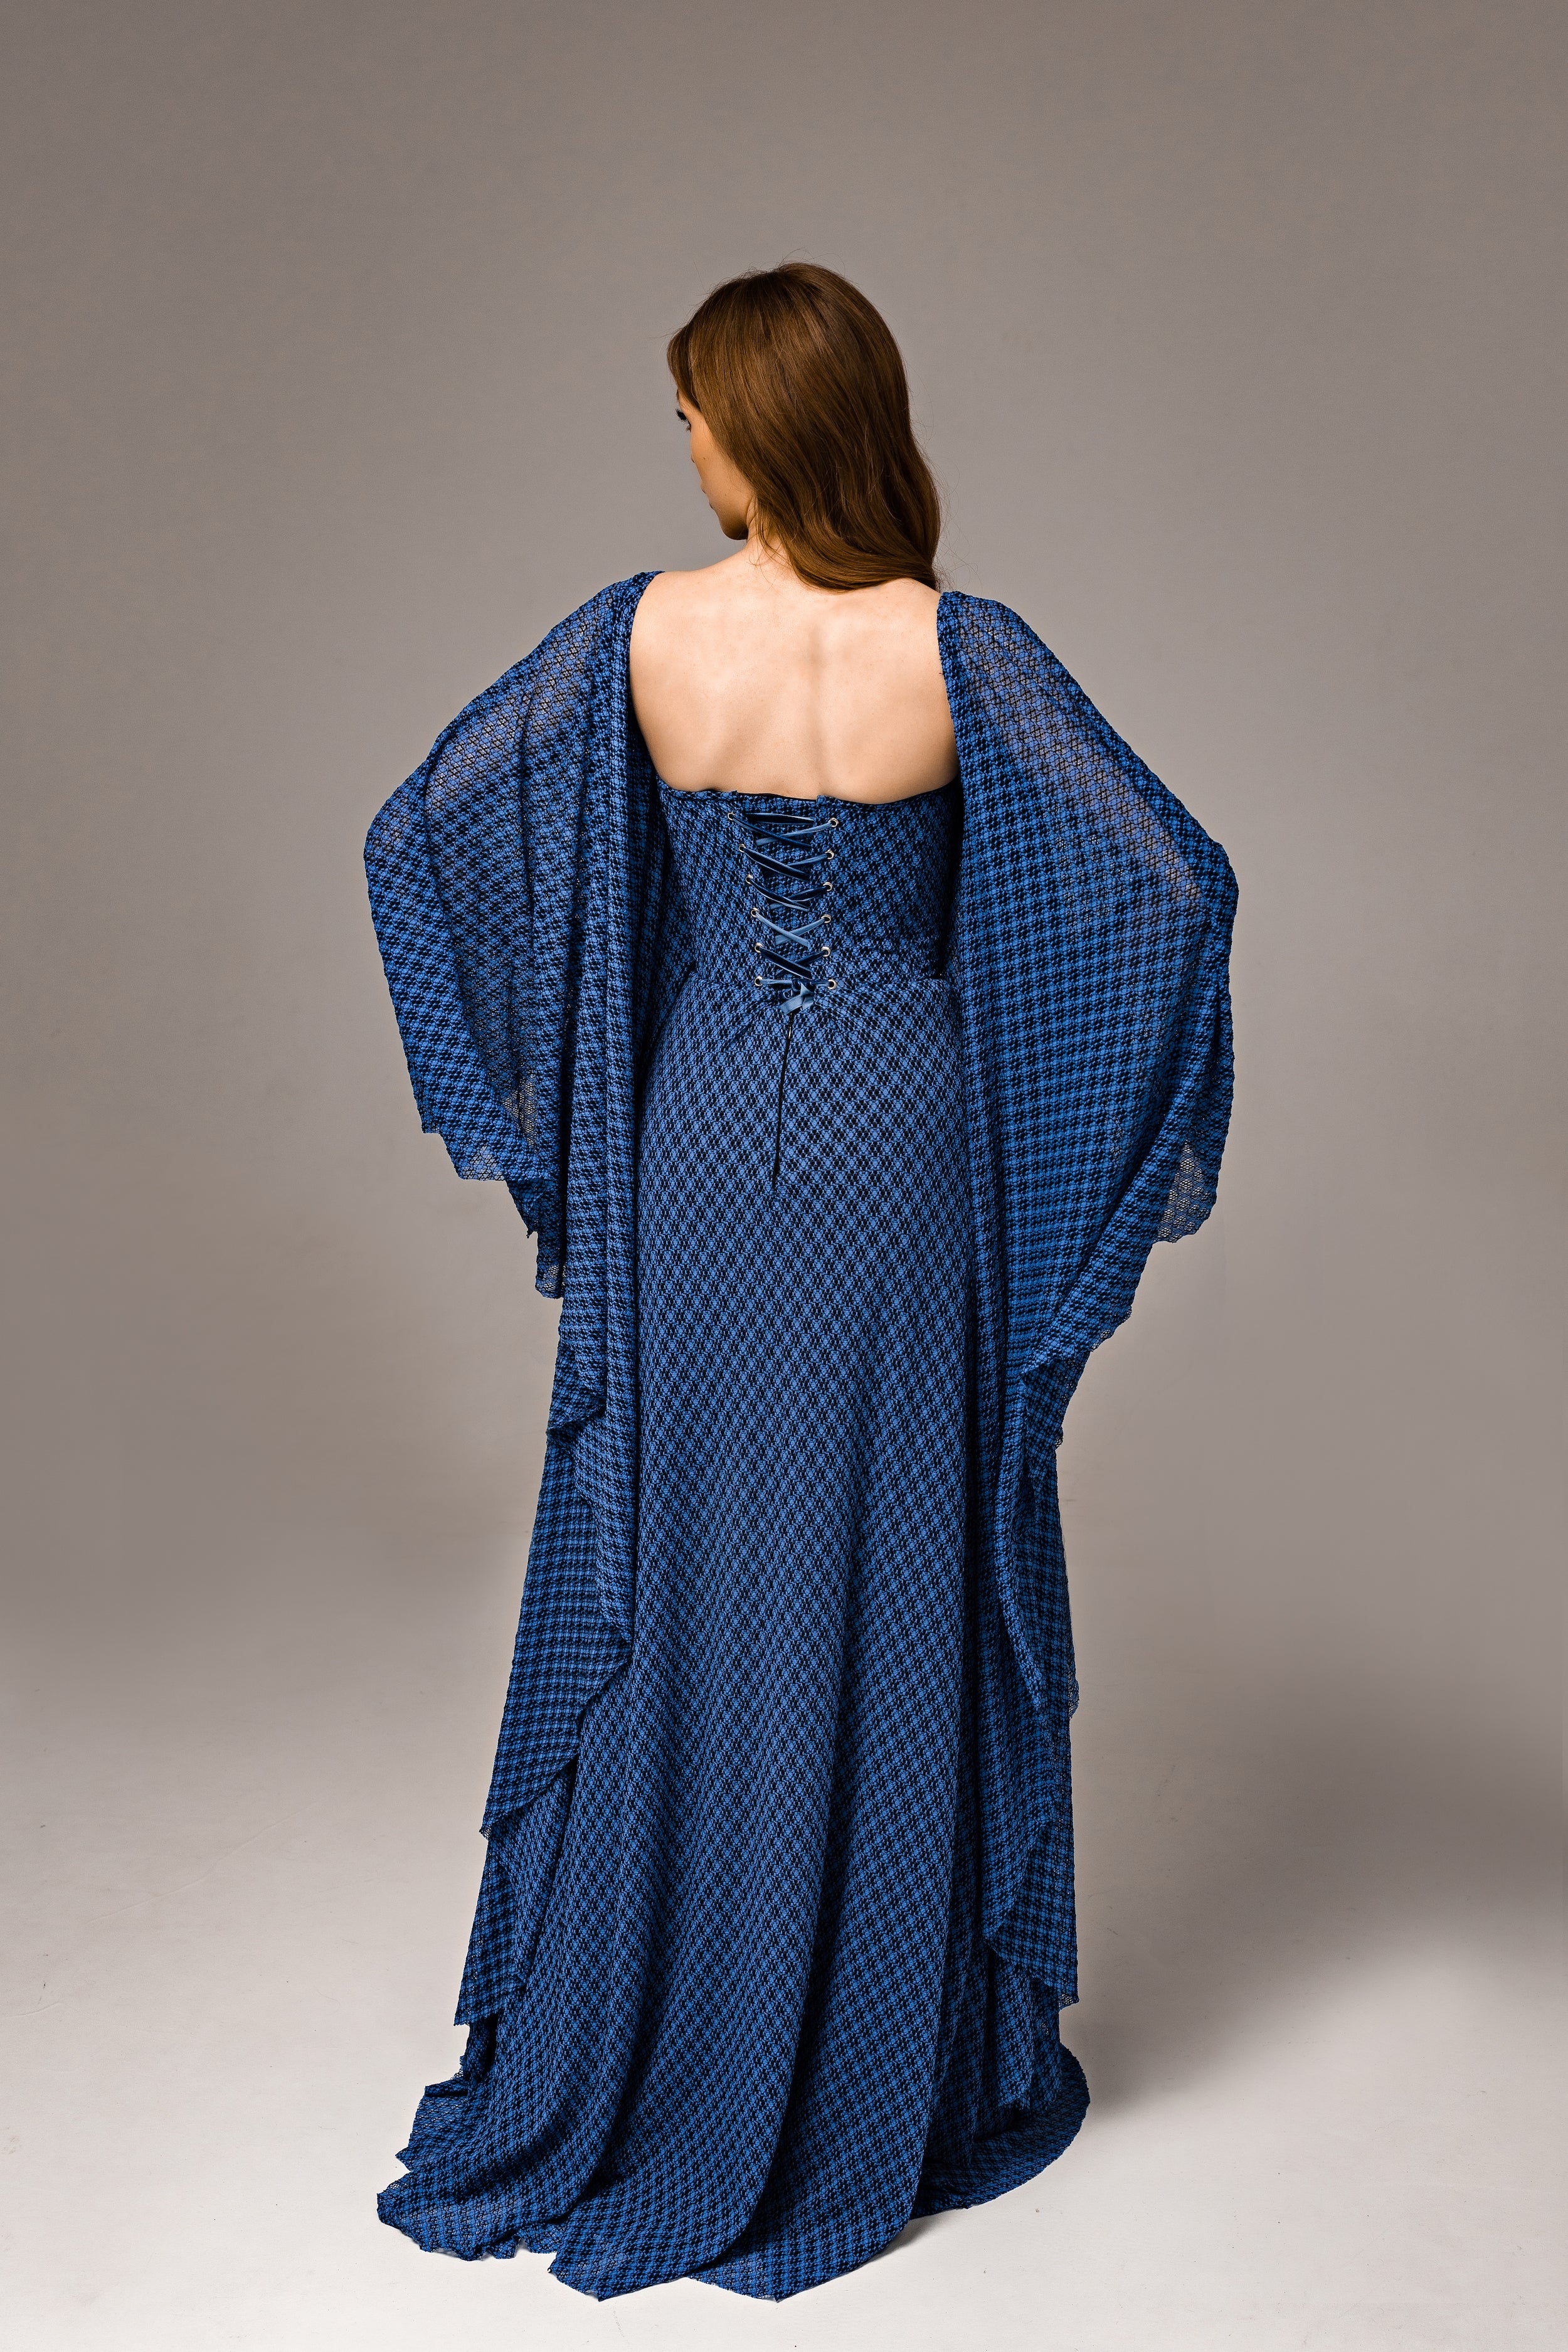 "Tori" Blue Knitted Lace Wedding Dress with Batwing Sleeves